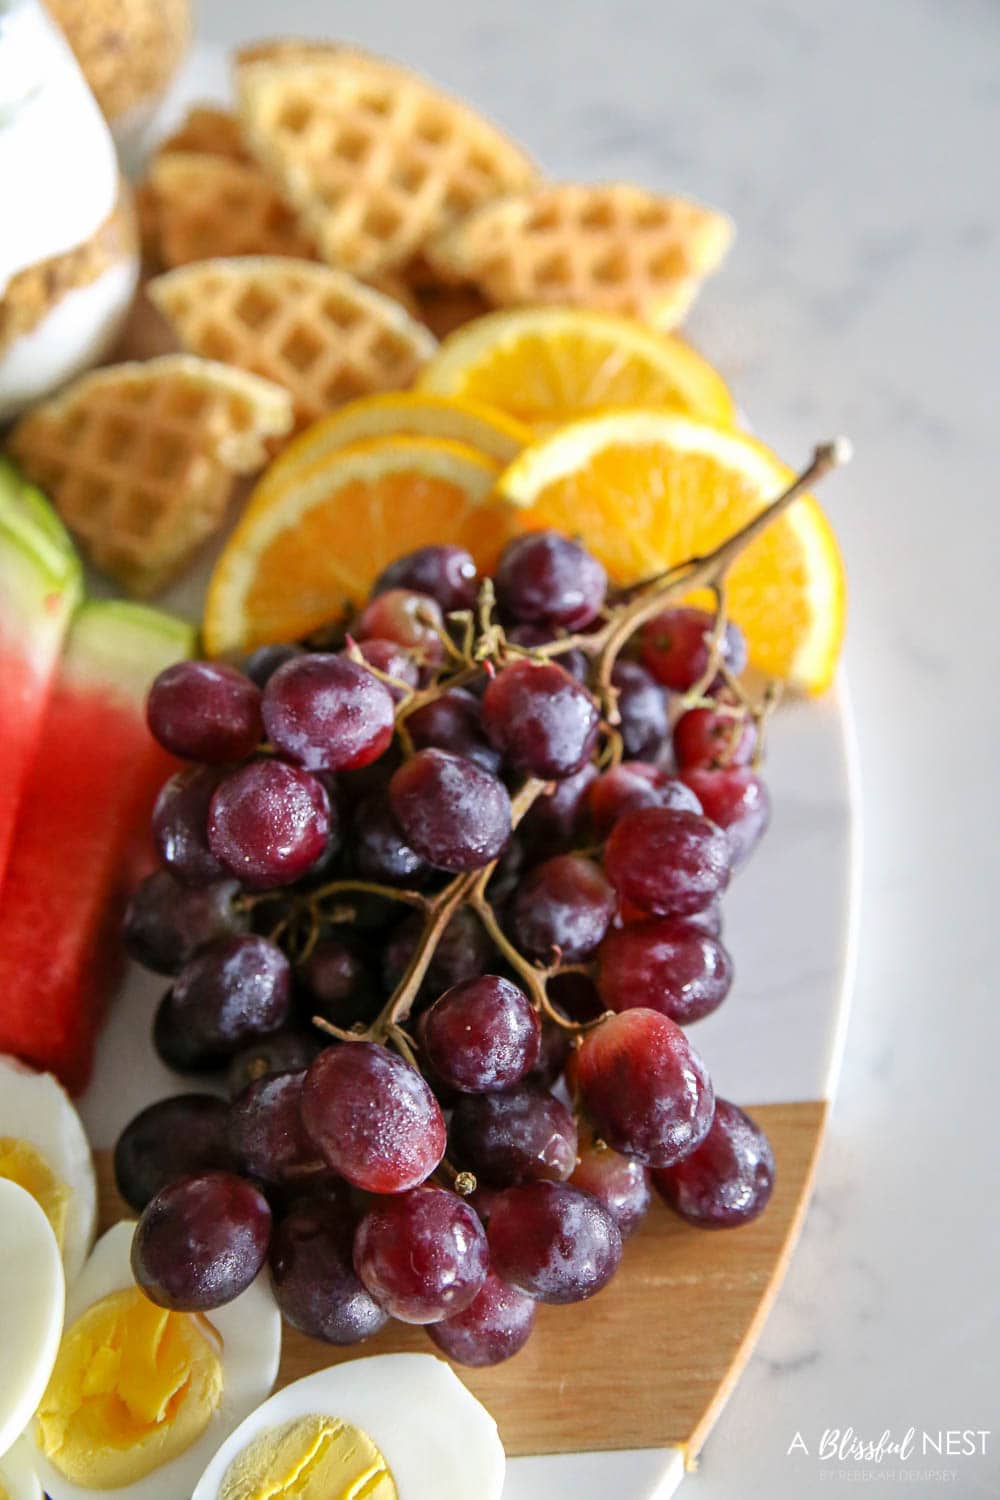 Make a brunch charcuterie board with all these breakfast items for your family on the weekends or for a girls brunch with friends. #ABlissfulNest #charcuterieboard #brunchrecipes #breakfastrecipes